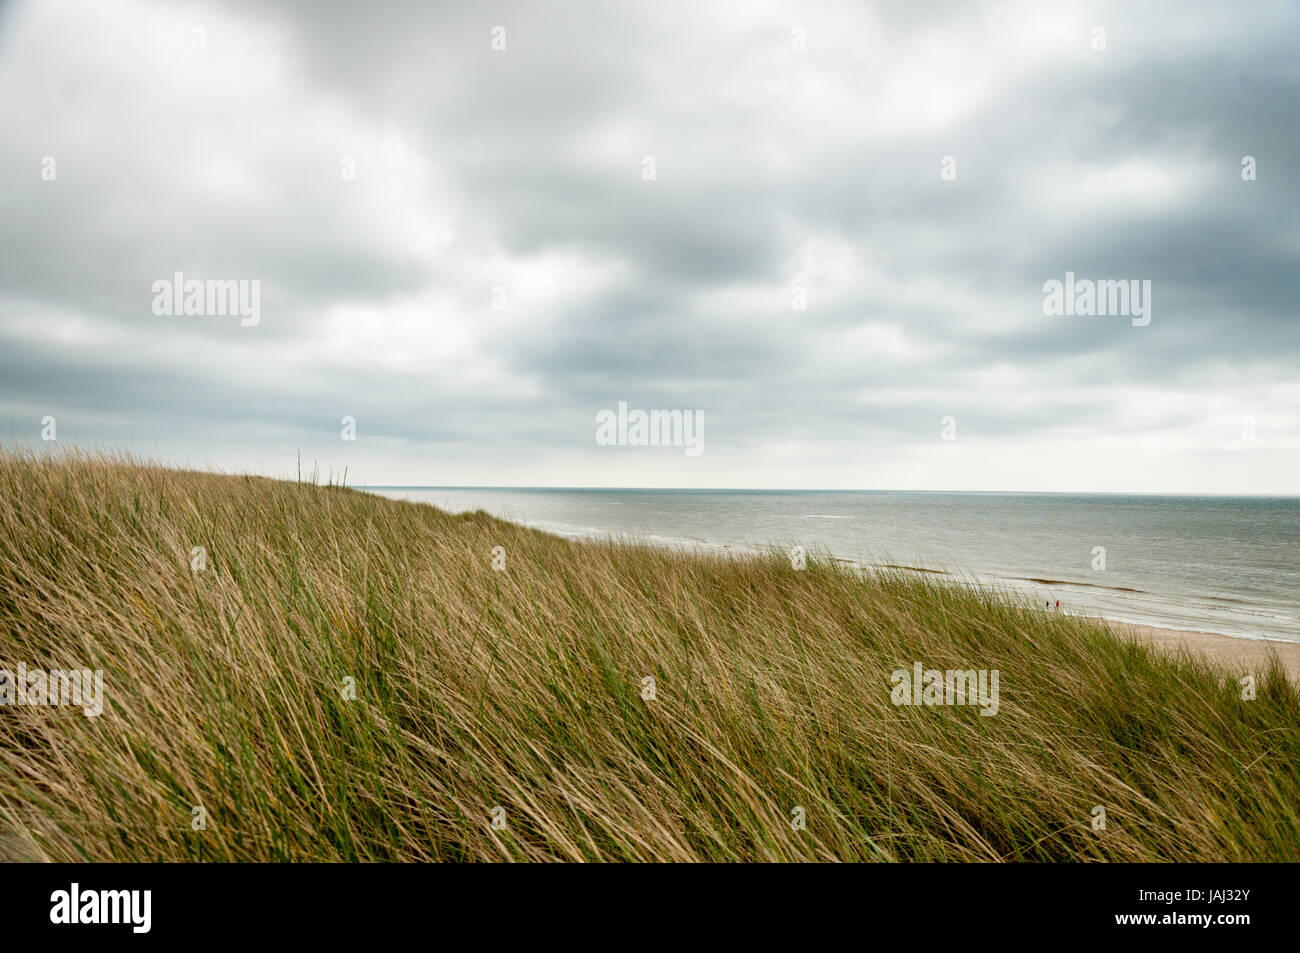 Grassy beach by the sea on a brooding cloudy day Stock Photo